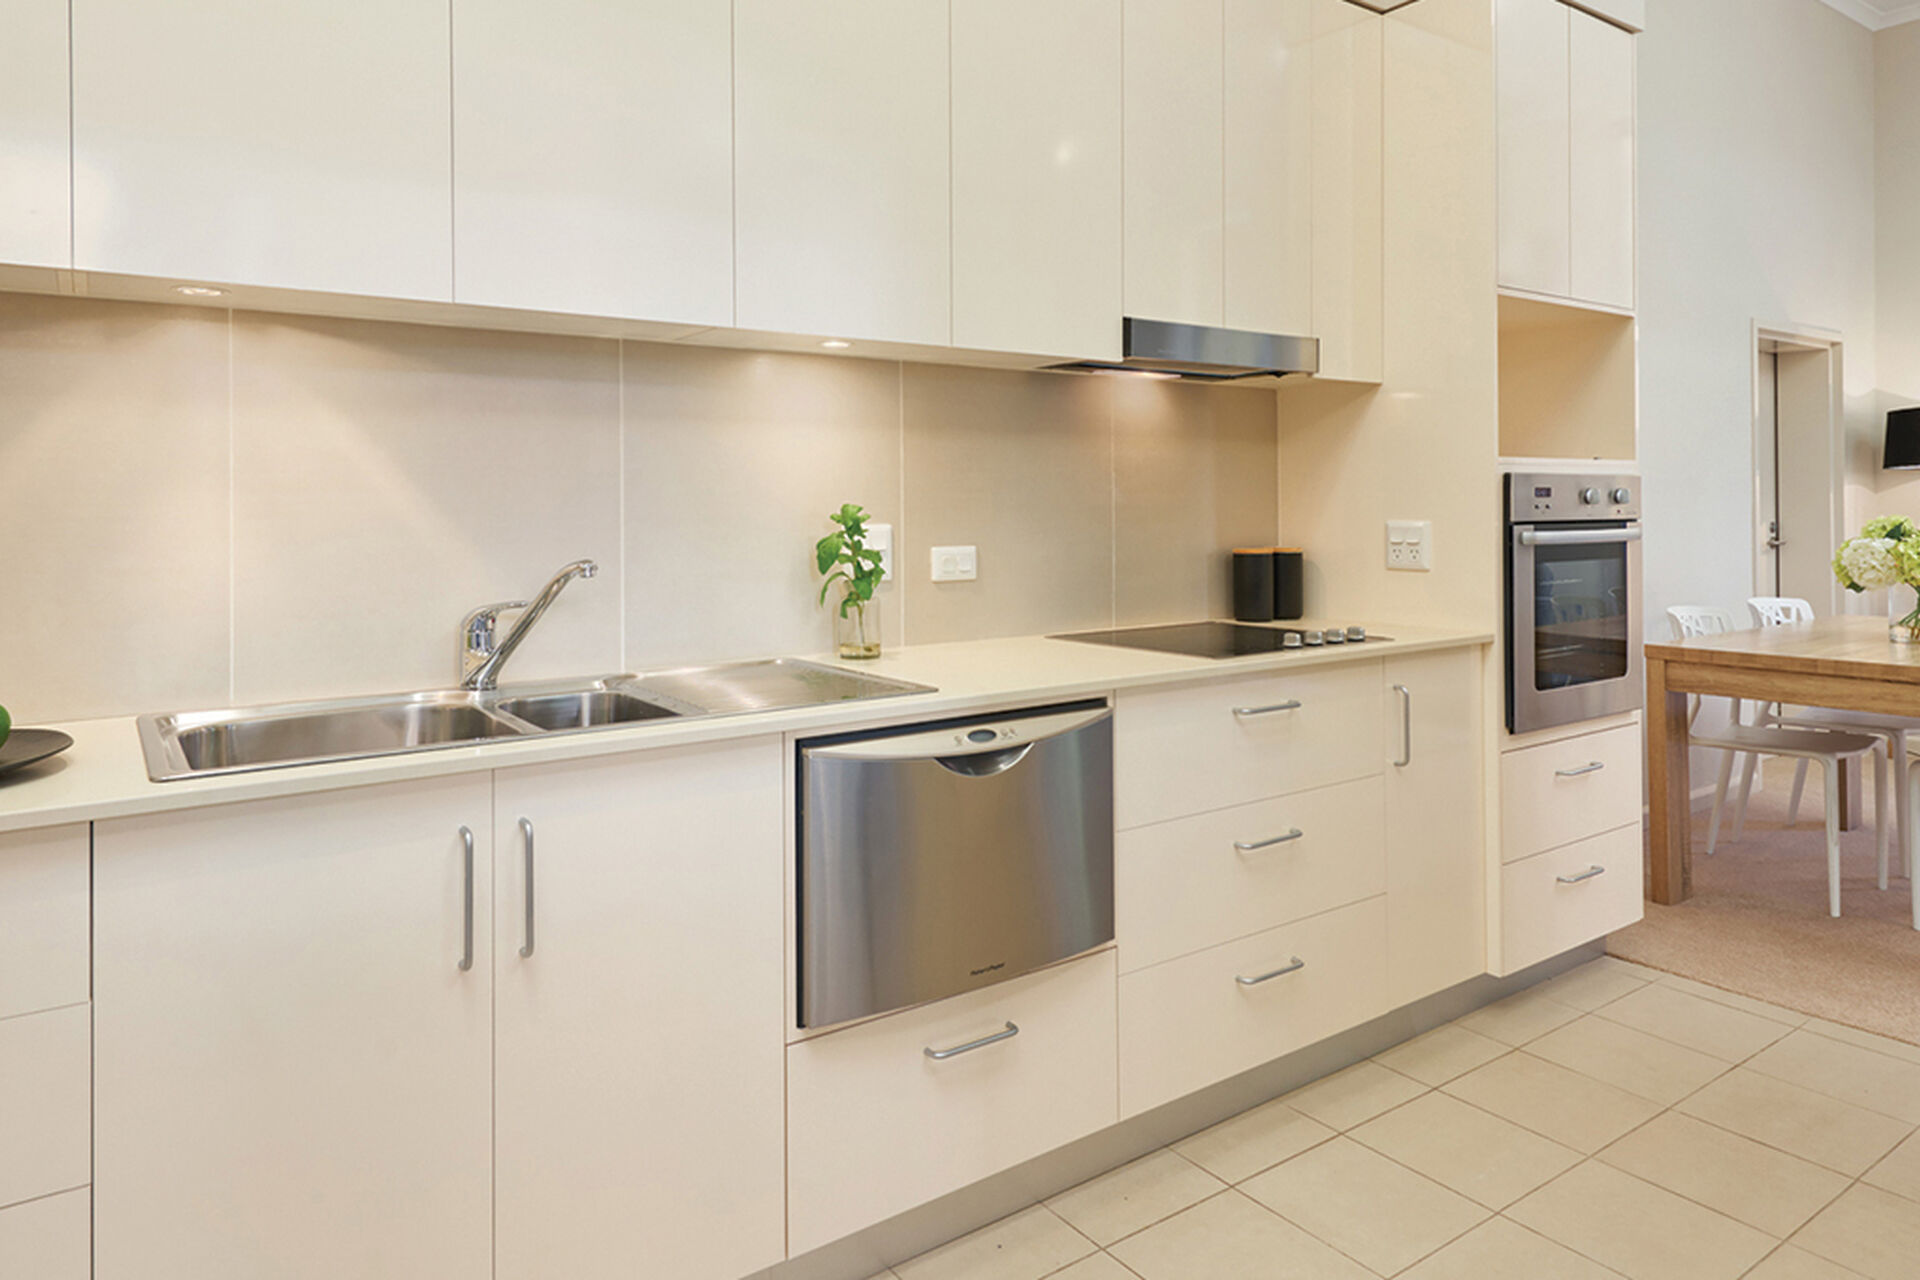 large spacious kitchen of the over 55s retirement village baptistcare Watermark village Wagga Wagga